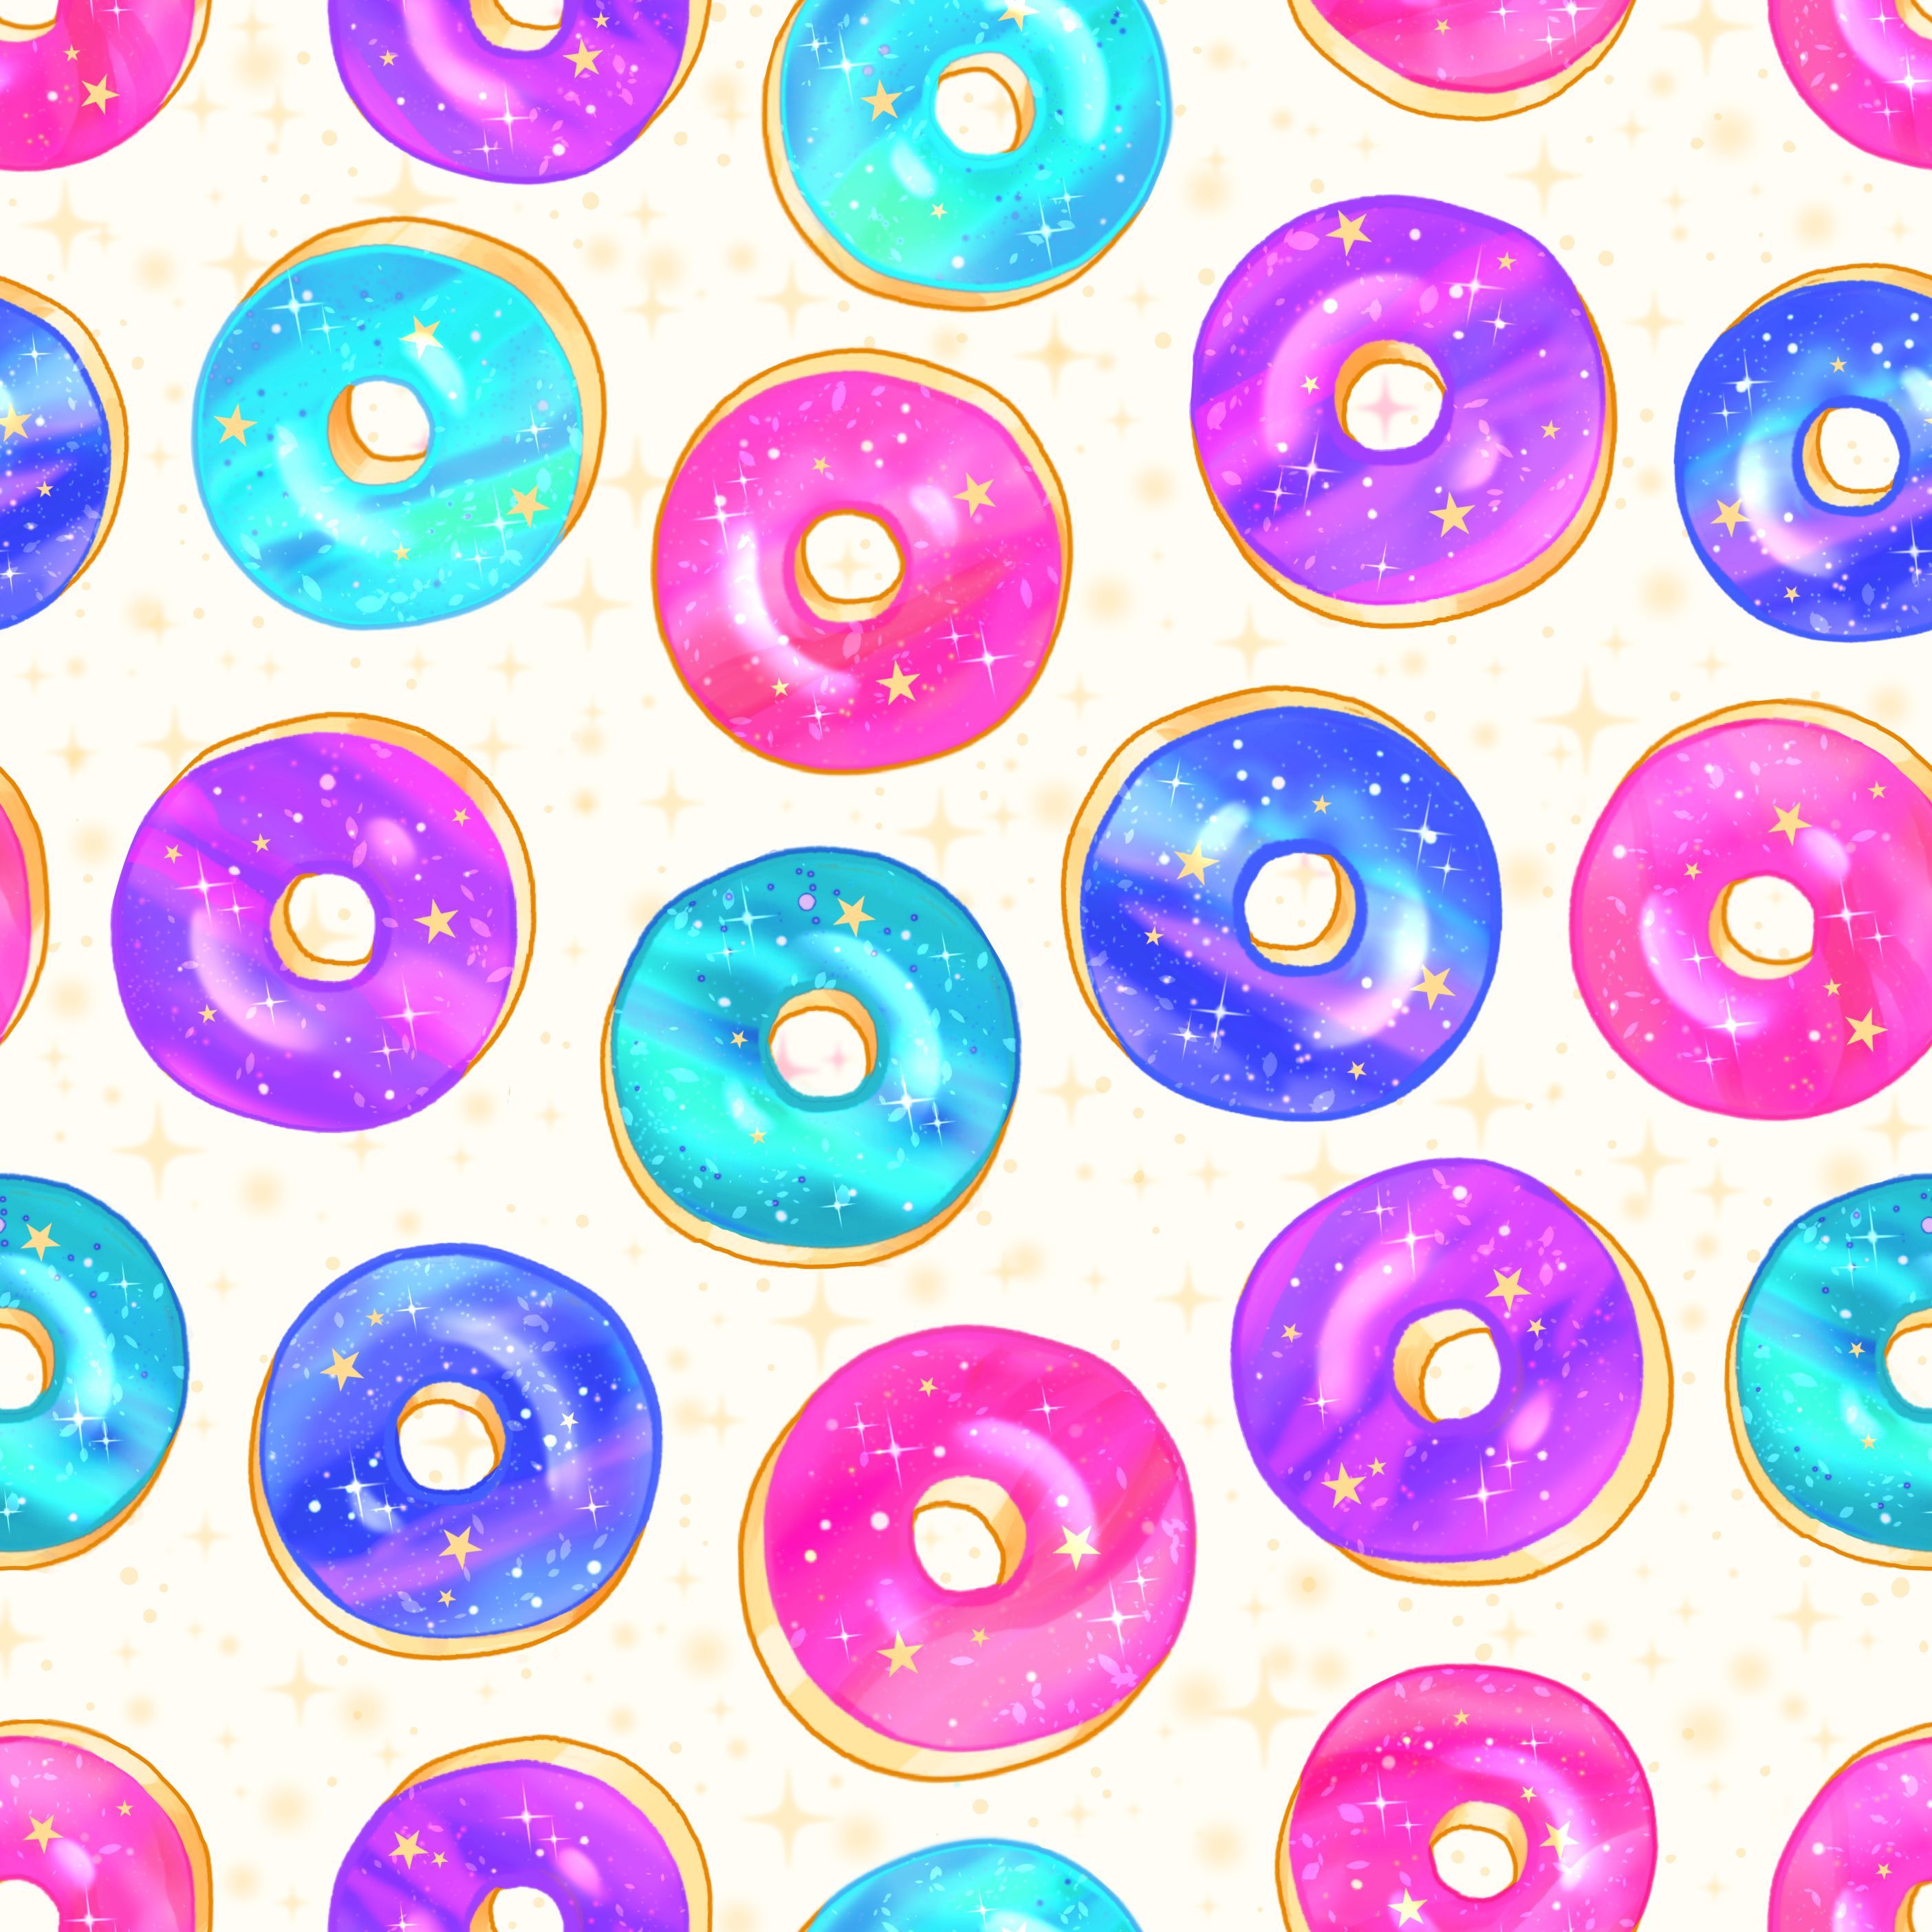 Colorful fabrics digitally printed by Spoonflower Donuts on Cream. iPhone wallpaper kawaii, Donut background, Spoonflower fabric